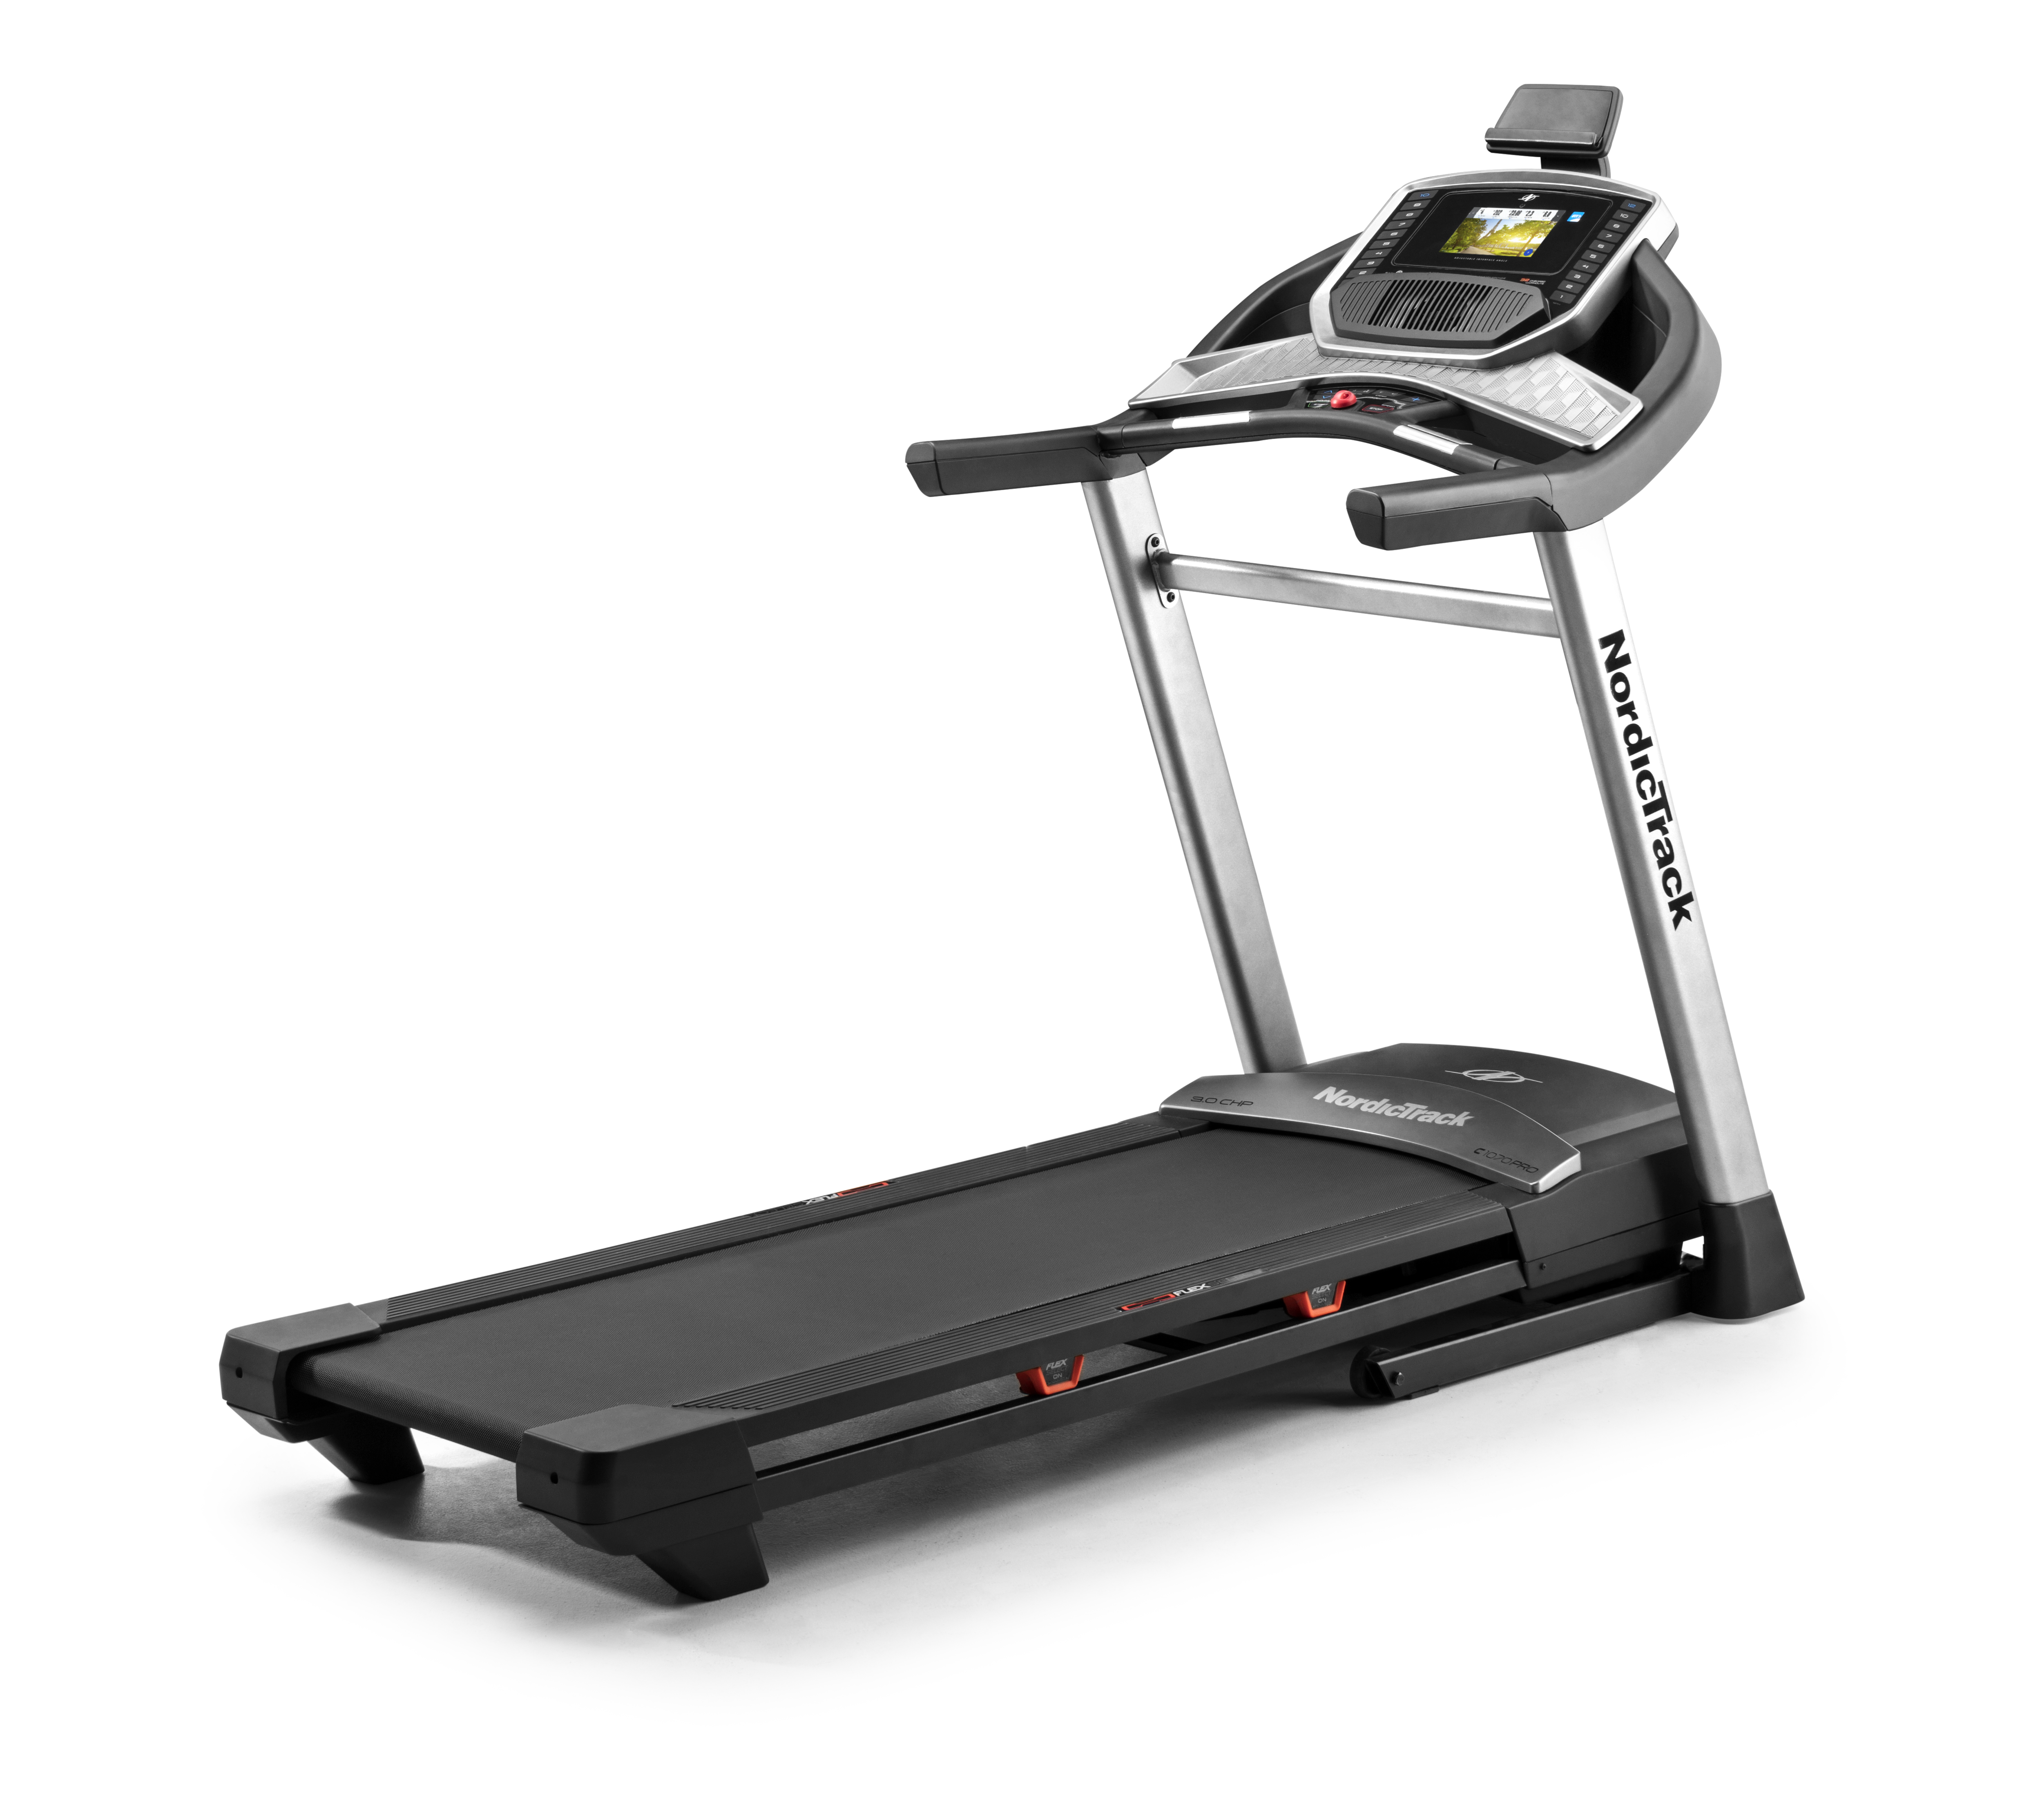 NordicTrack C 1070 PRO Treadmill with iFit Coach 1 YR Membership